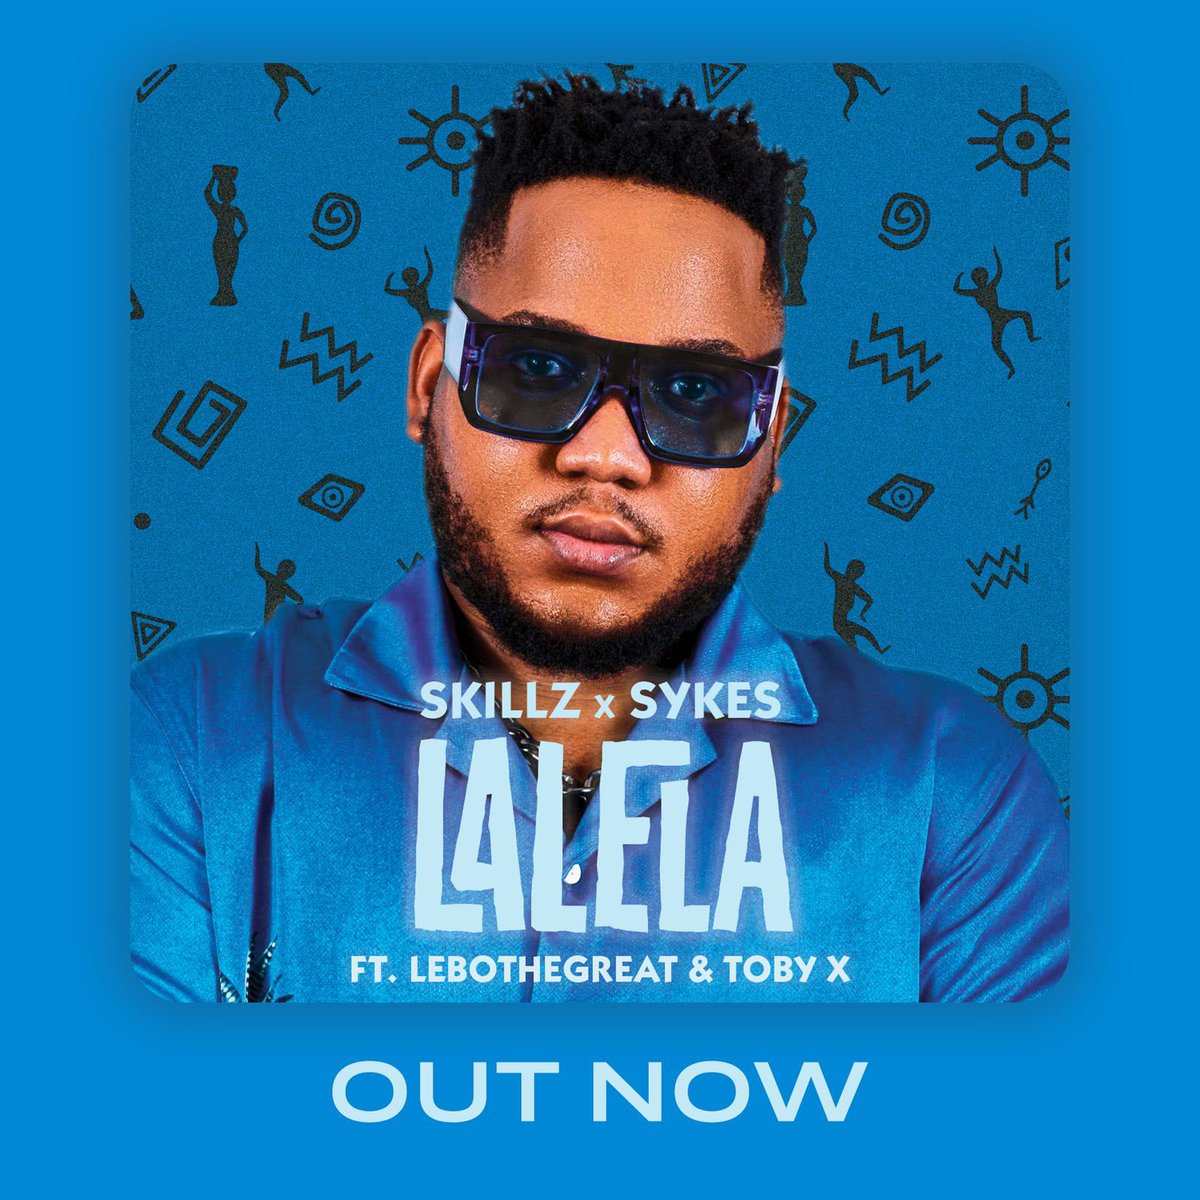 Congratulations Skillz & Sykes on your new release #Lalela with Lebothegreat and Toby 🥳💚 Im a big fan of your work guys keep it up. The song is available on all streaming platforms #emazulwiniproductions